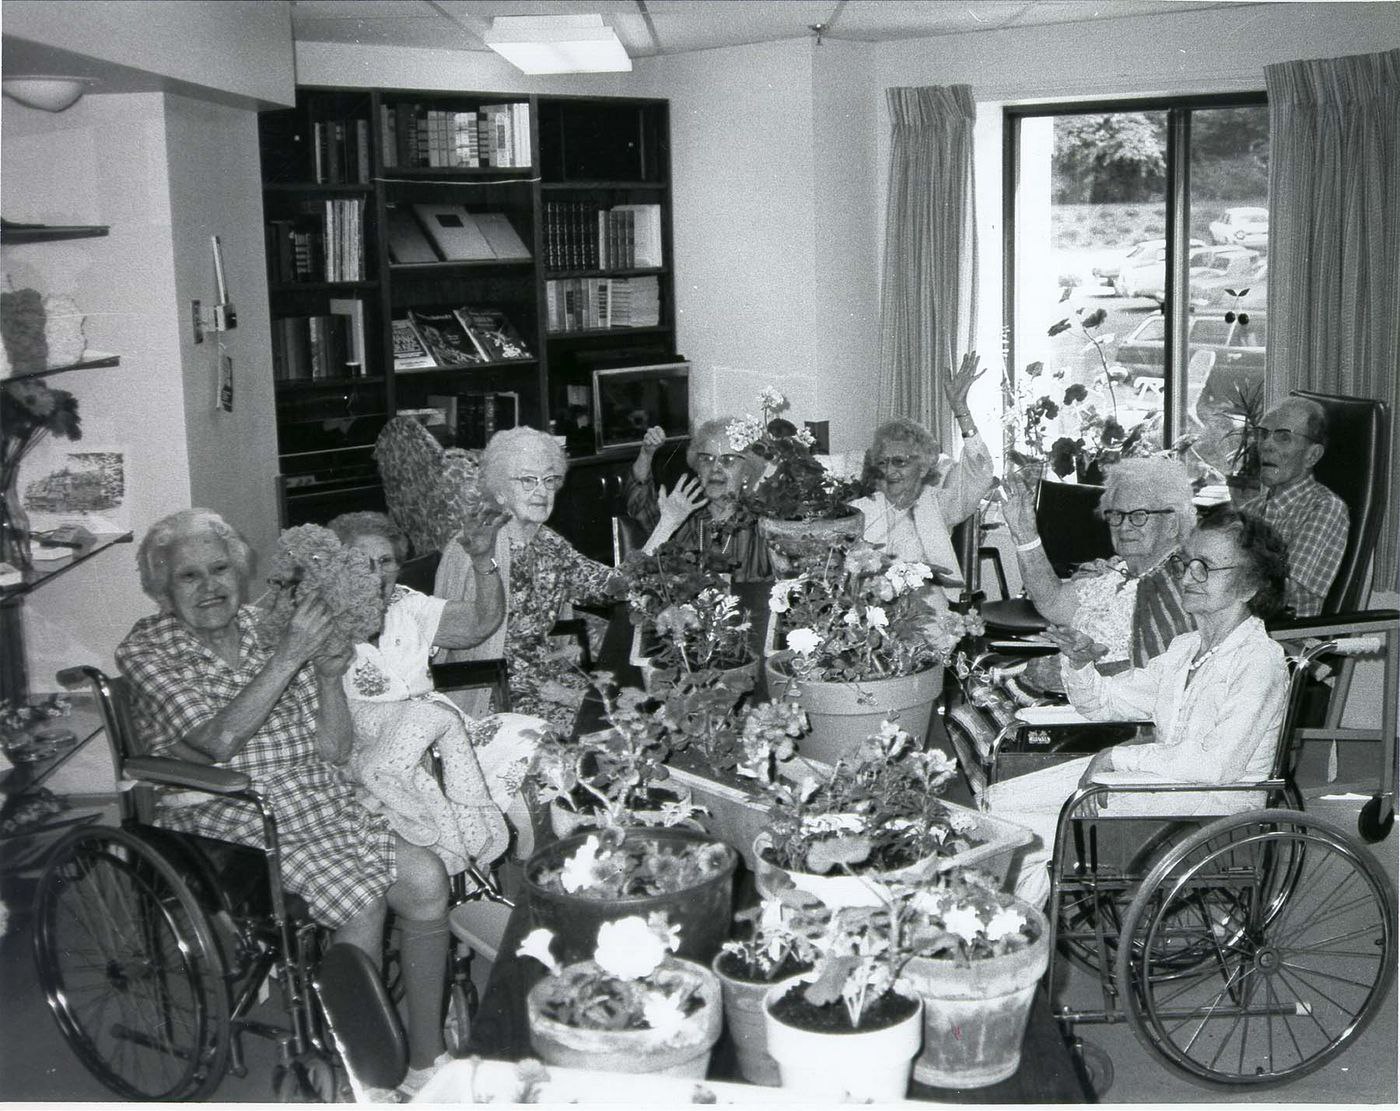 90 for 90: Celebrating 90 Years of Service to Seniors